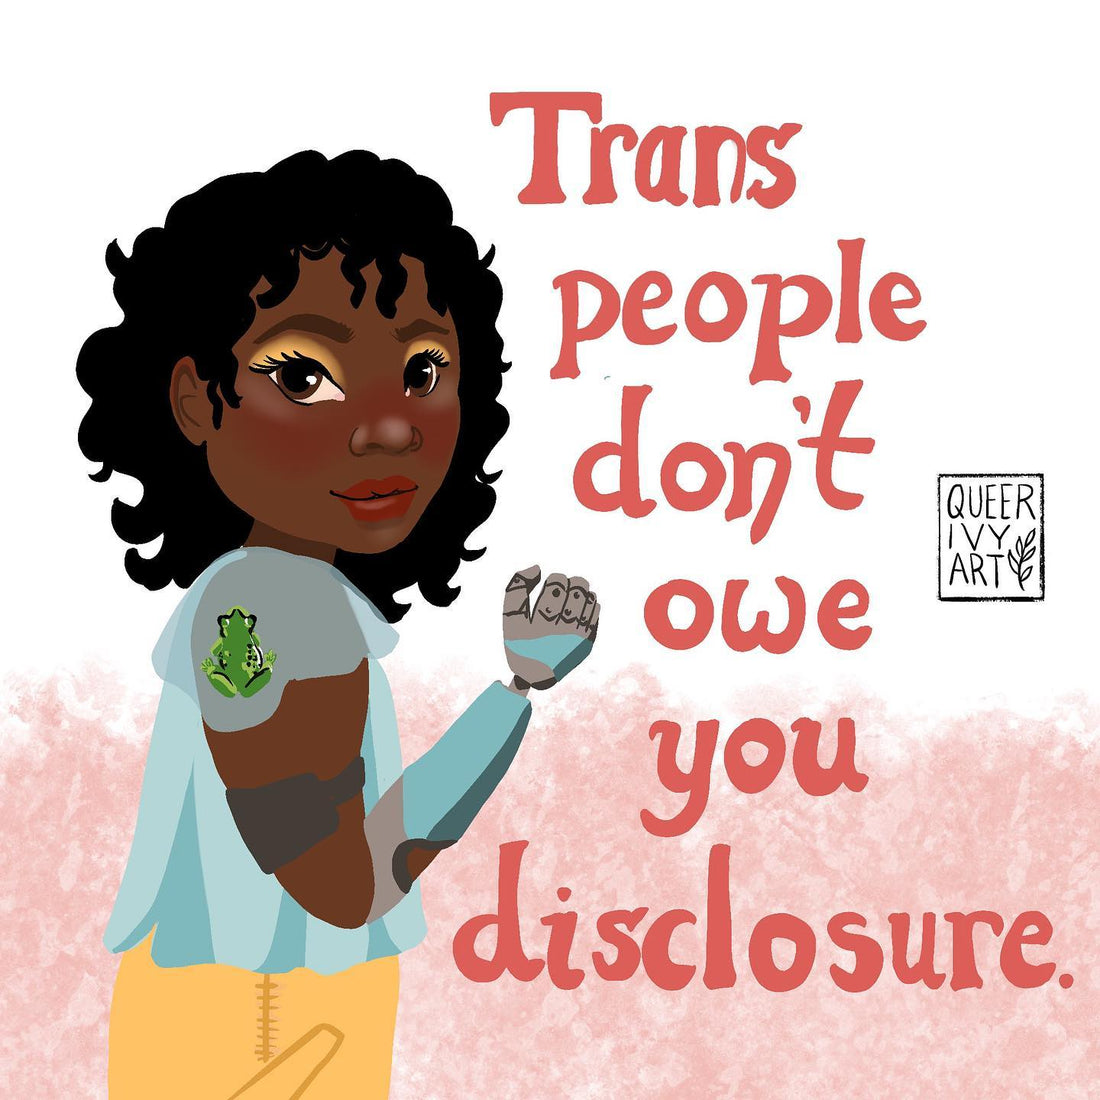 Trans People Don't owe you Disclosure